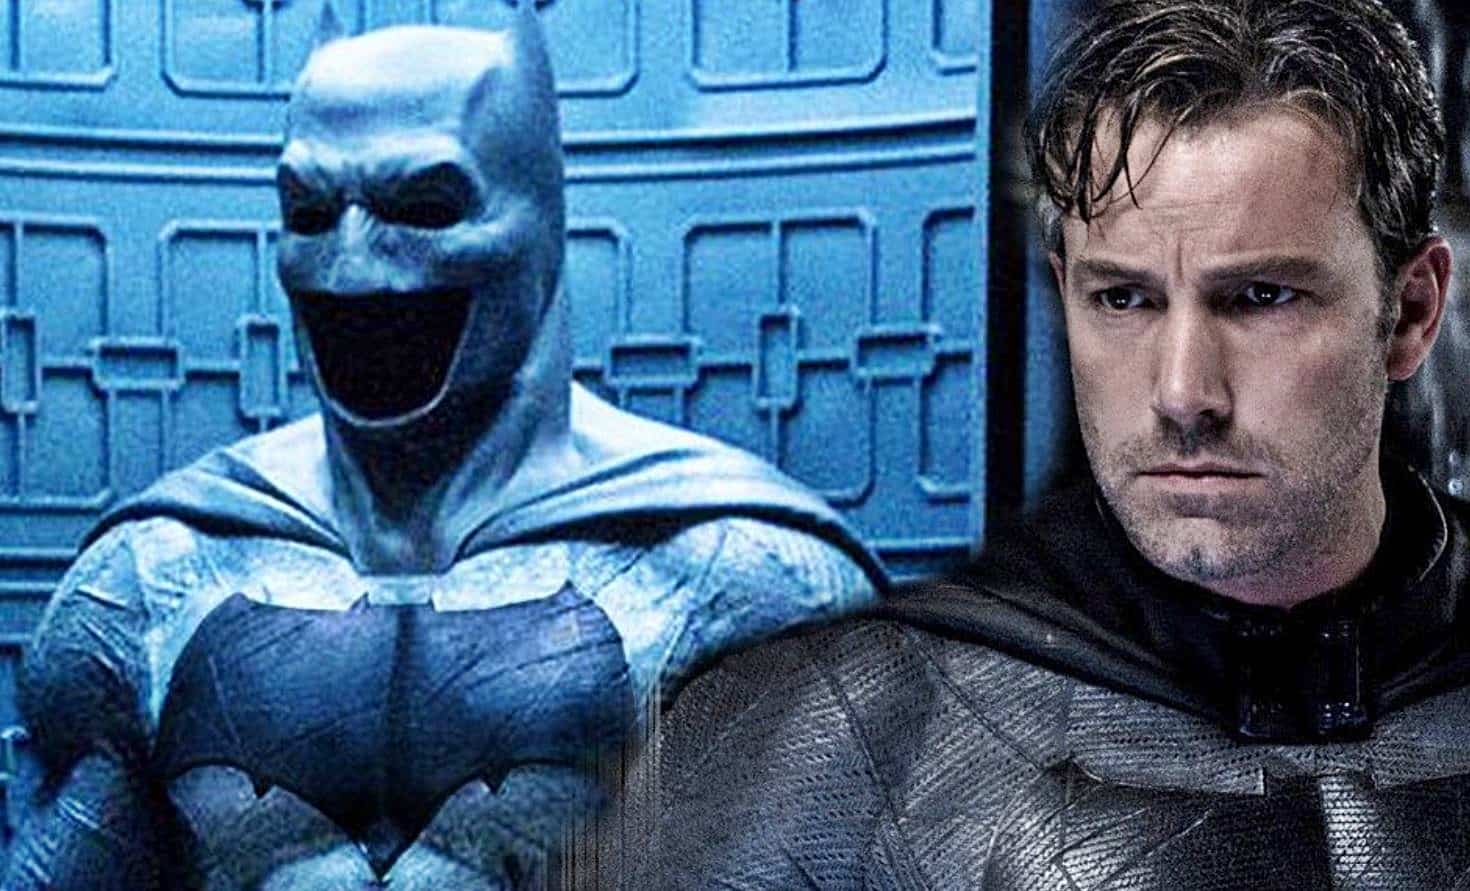 Batman Movie Begins Production In November Likely Without Ben Affleck